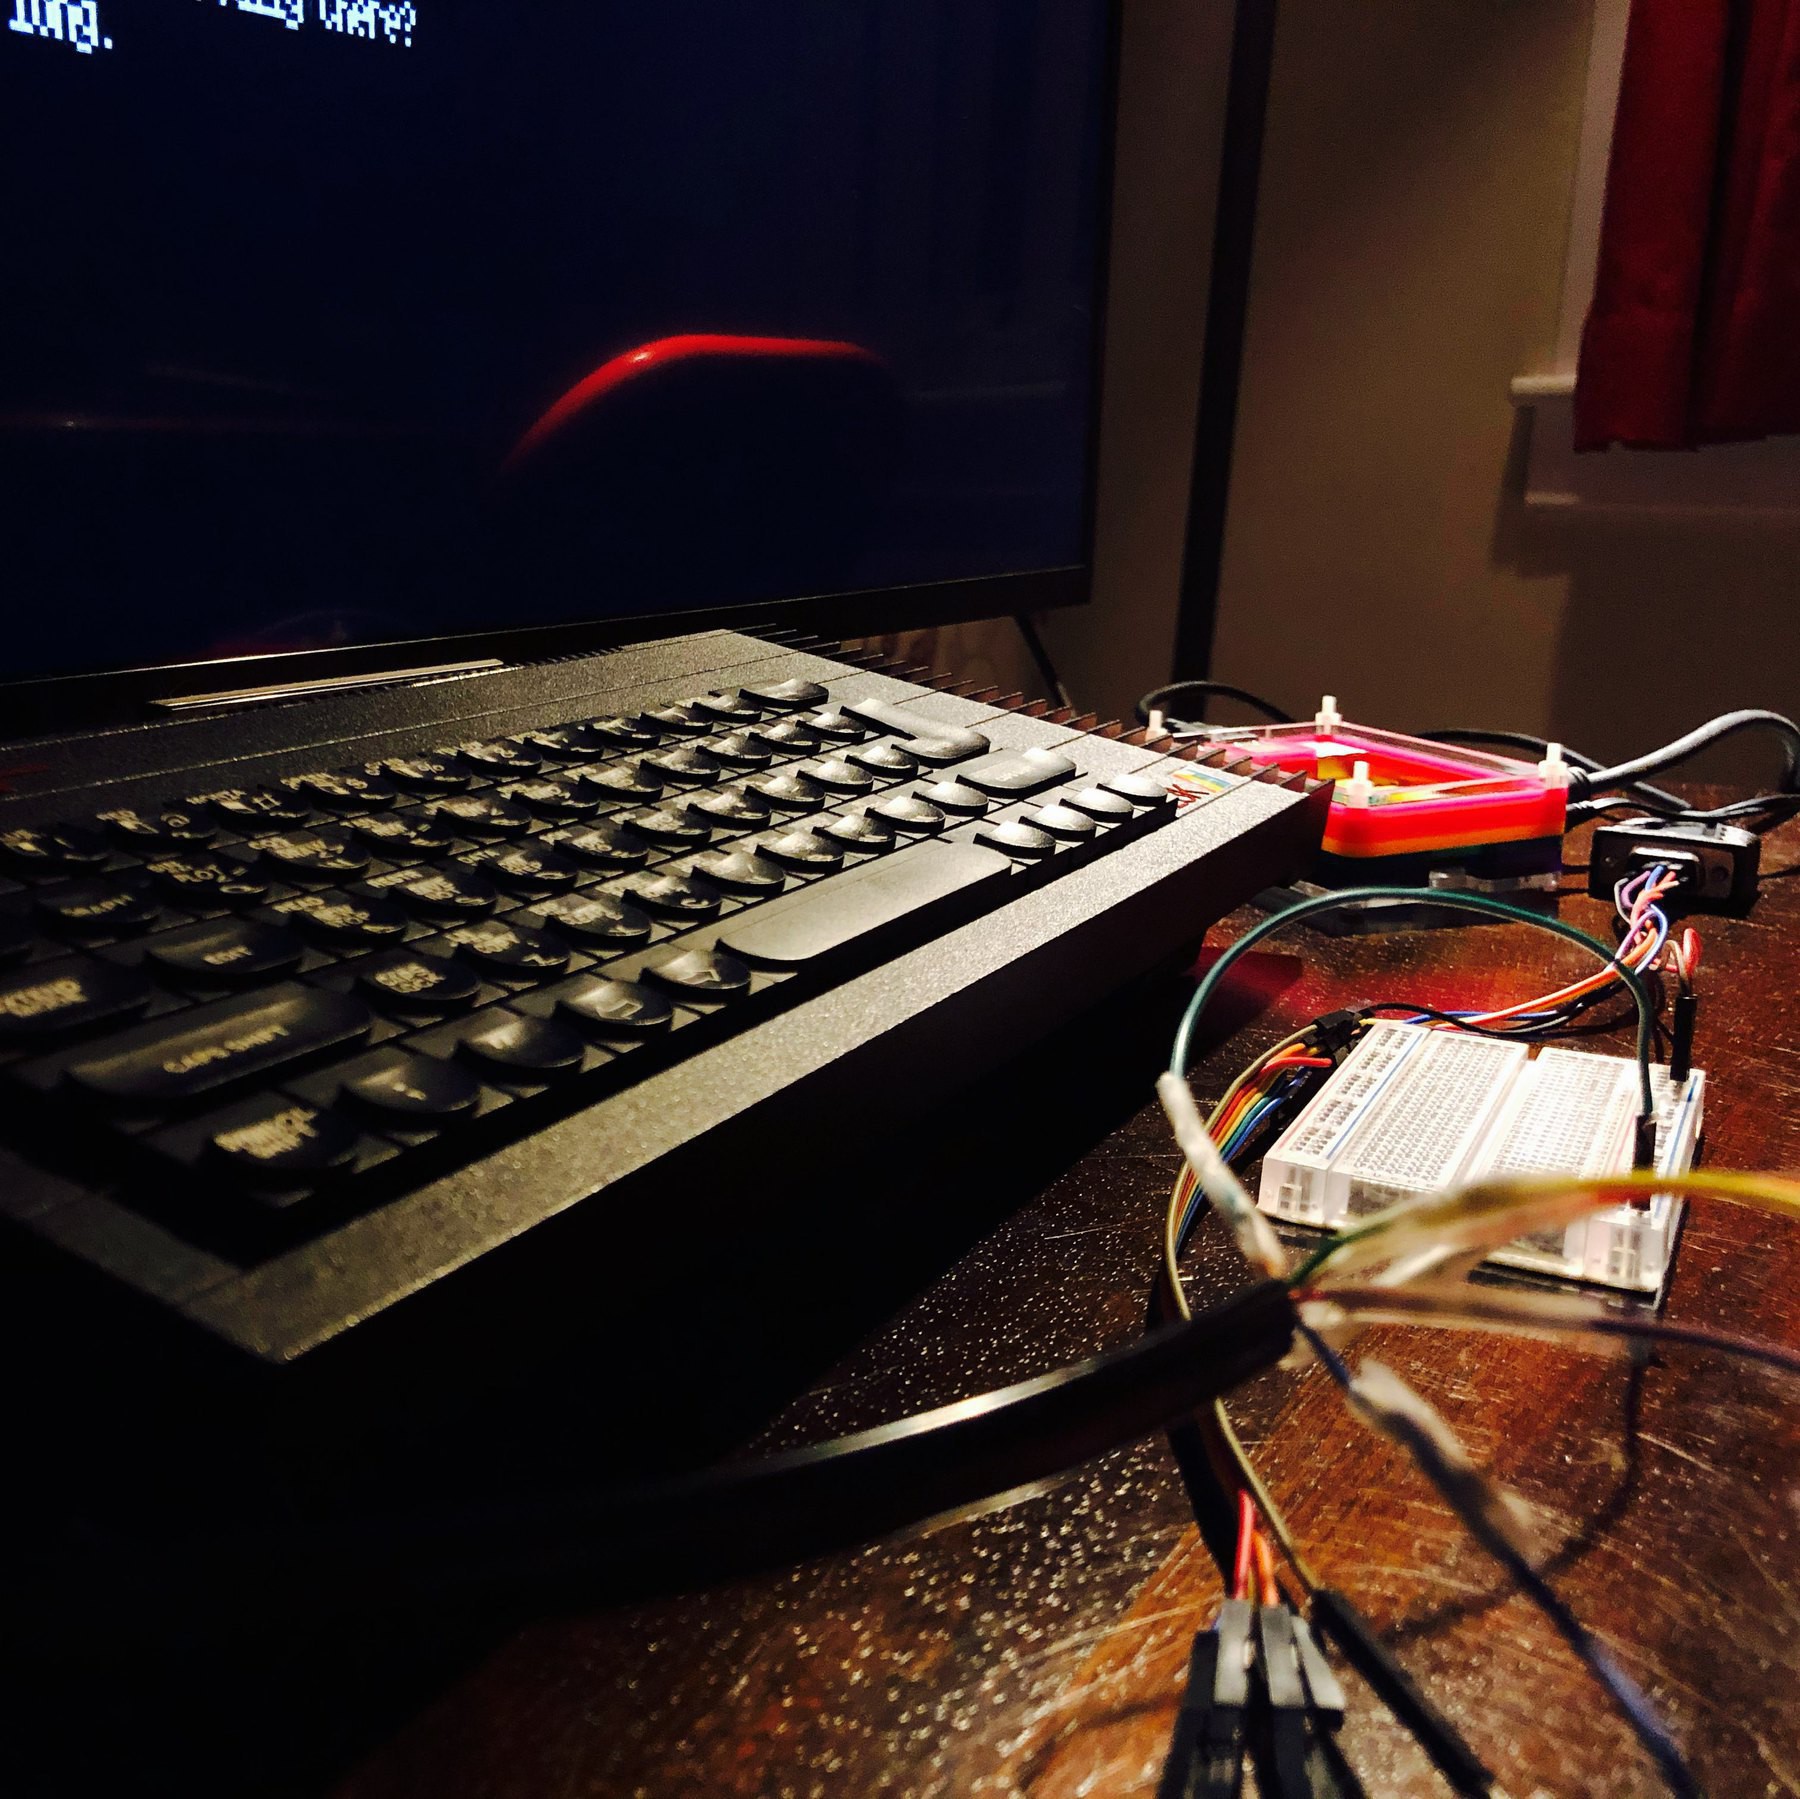 ZX Spectrum 128 ("Toast Rack") connected to a Raspberry Pi 3 via RS232/USB